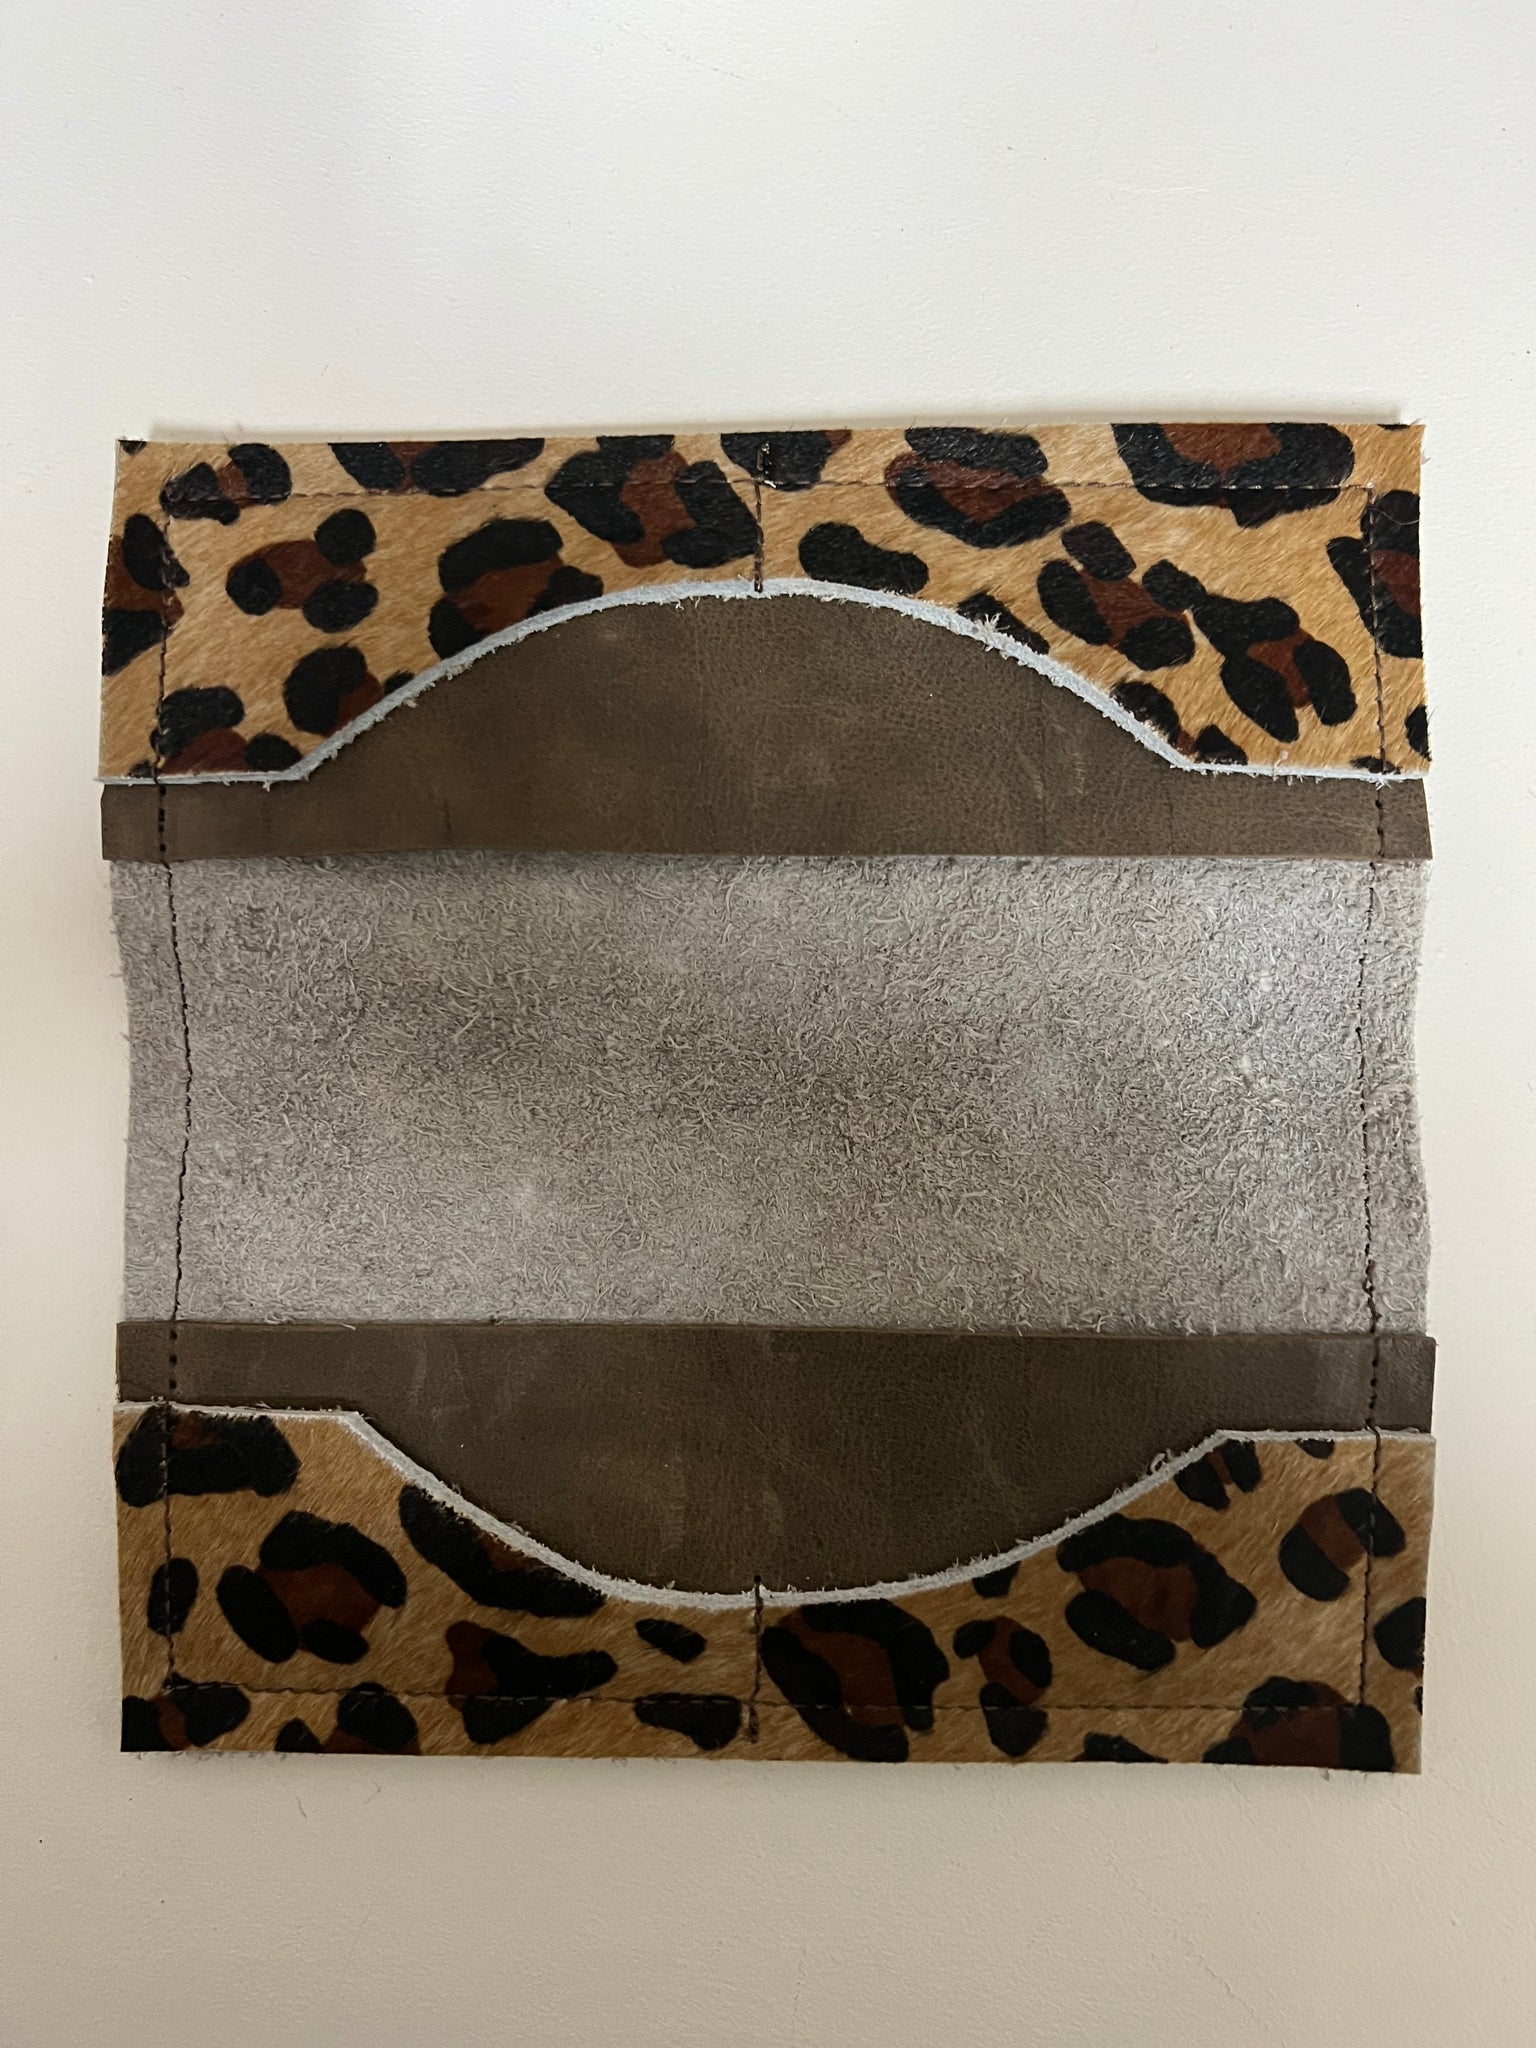 Upcycled Checkbook Cover/Wallet Leopard